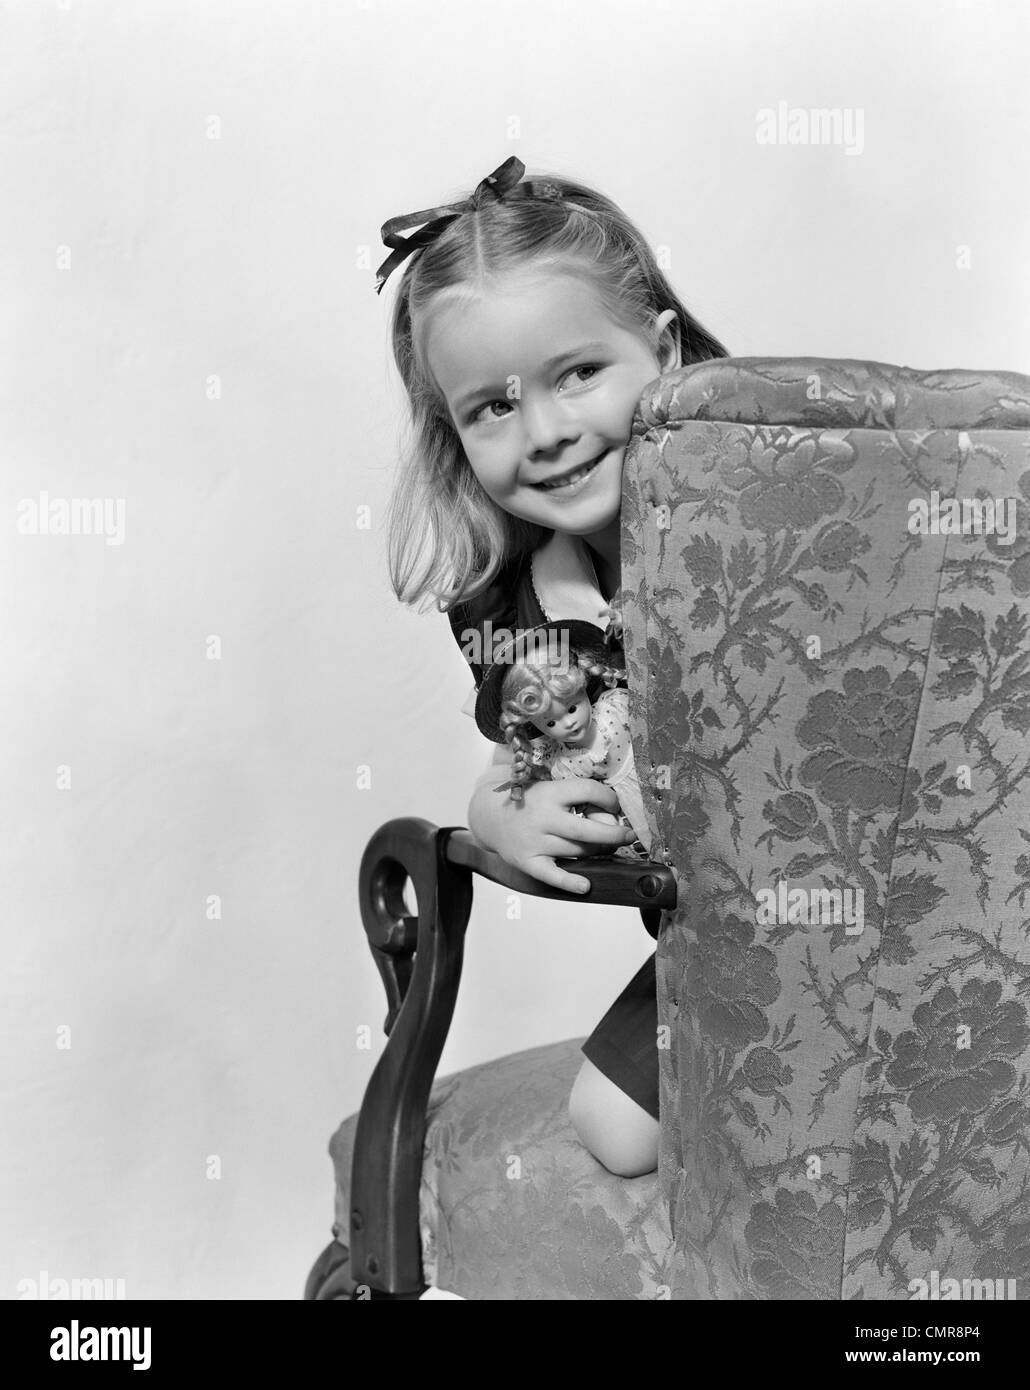 1940s LITTLE GIRL HOLDING DOLL PEEKING AROUND SIDE OF CHAIR Stock Photo